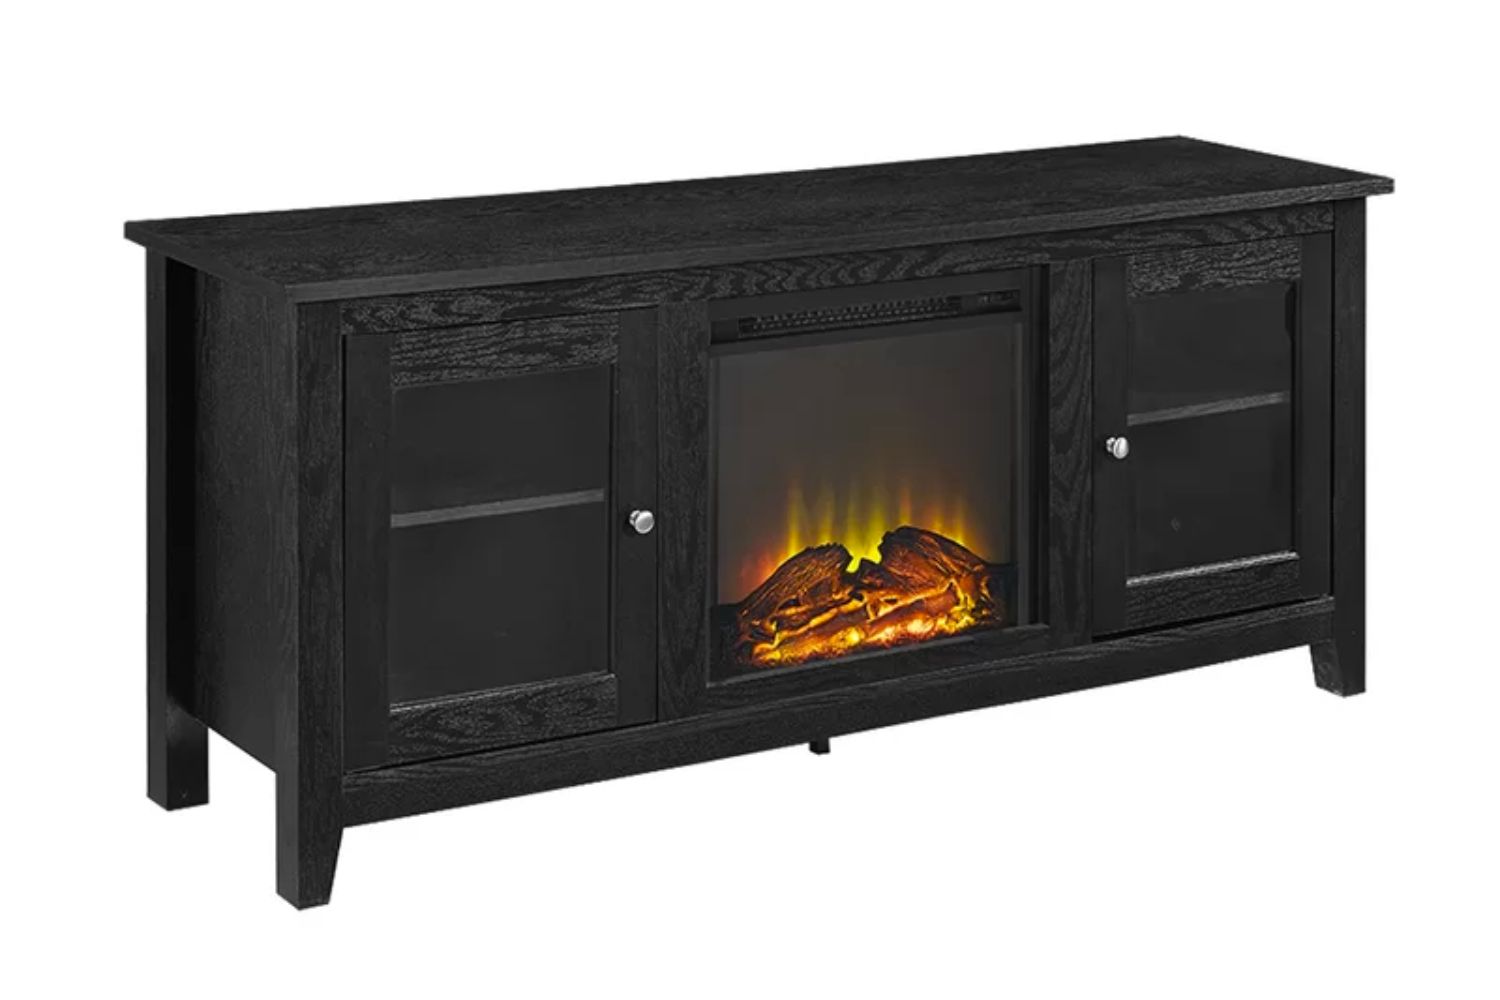 The Best Furniture Deals Option: Zipcode Design Kohn TV Stand with Fireplace